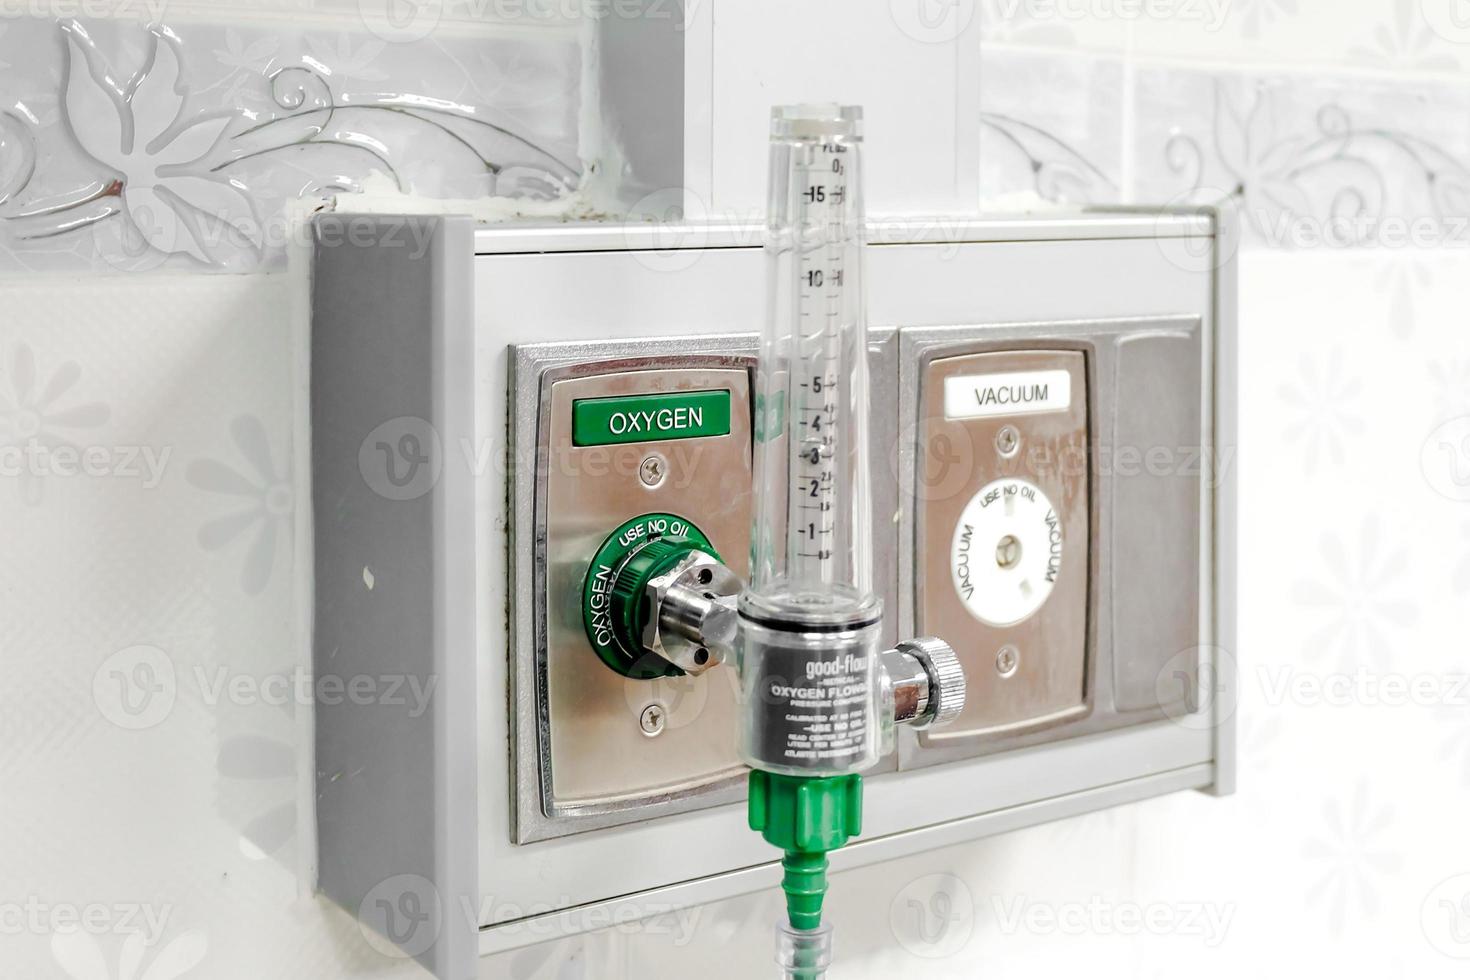 Oxygen flow meter plugged in the green outlet on  hospital wall, Medical equipment. photo